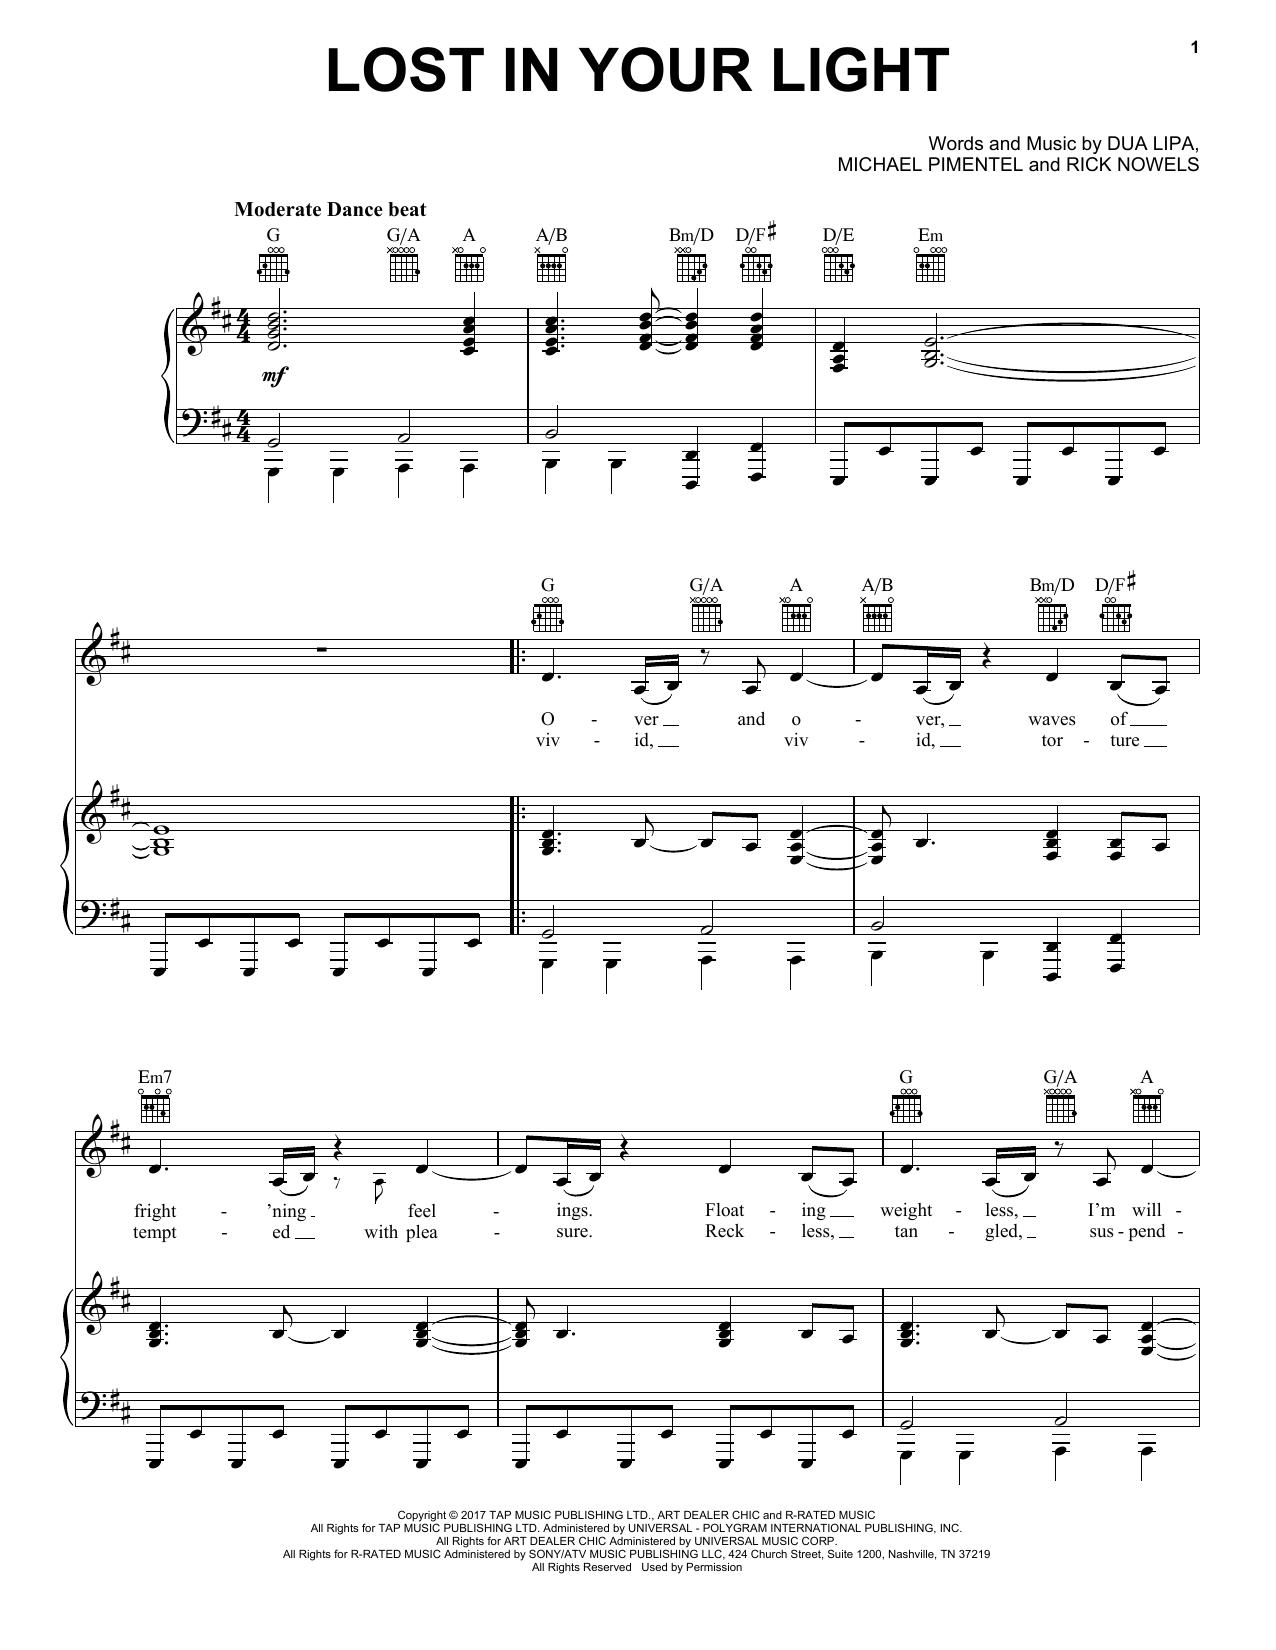 Download Dua Lipa Lost In Your Light (featuring Miguel) Sheet Music